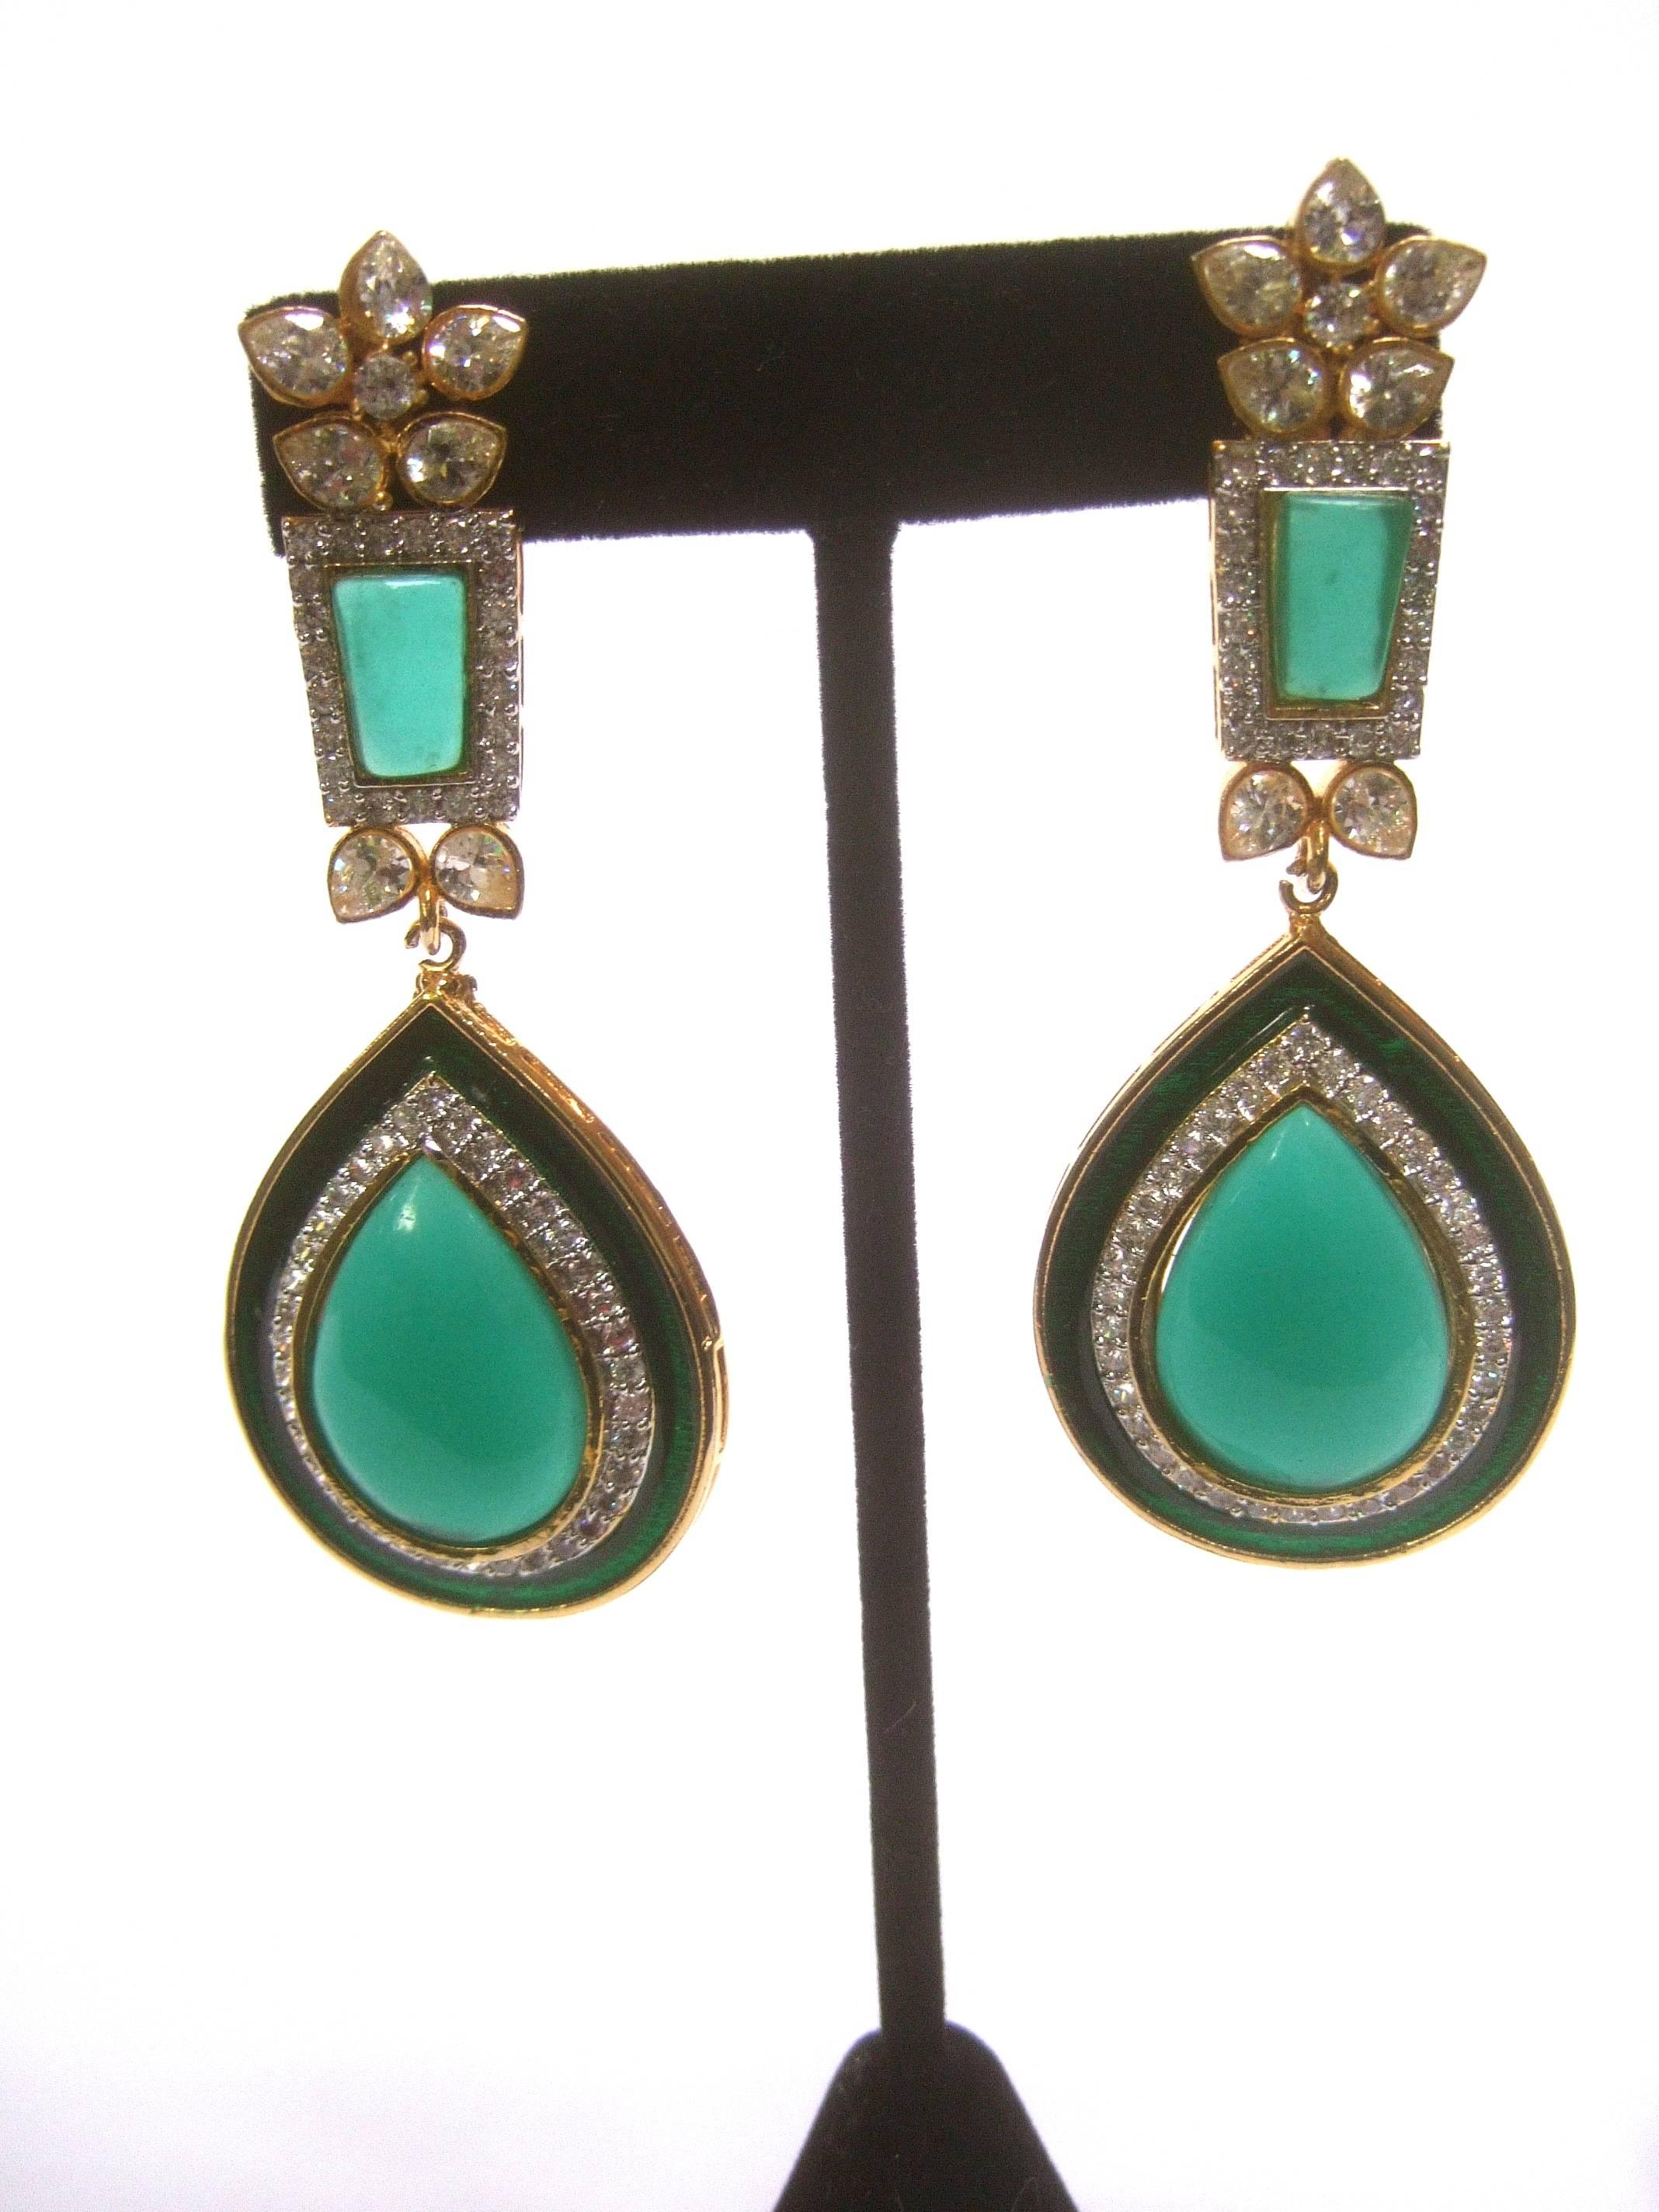 Exquisite emerald green poured glass massive tear drop earrings
The striking poured glass statement earrings are designed 
with a dangling green glass tear drop stone framed with 
glittering diamante crystals and green enamel 

The top of the